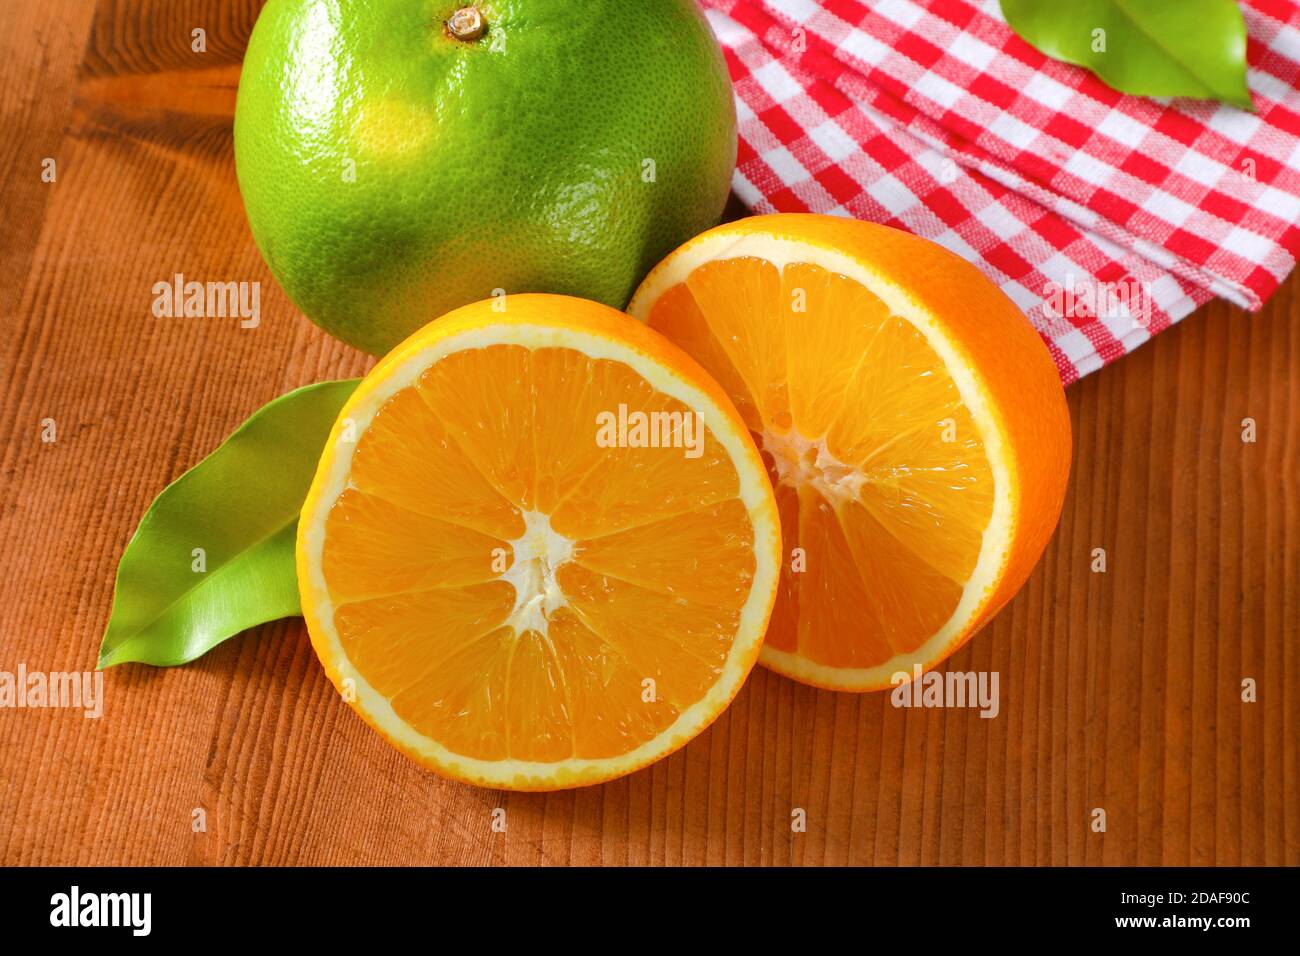 Green grapefruit (sweetie, pomelit, oroblanco), two orange halves and checked red and white tea towel on wooden table Stock Photo